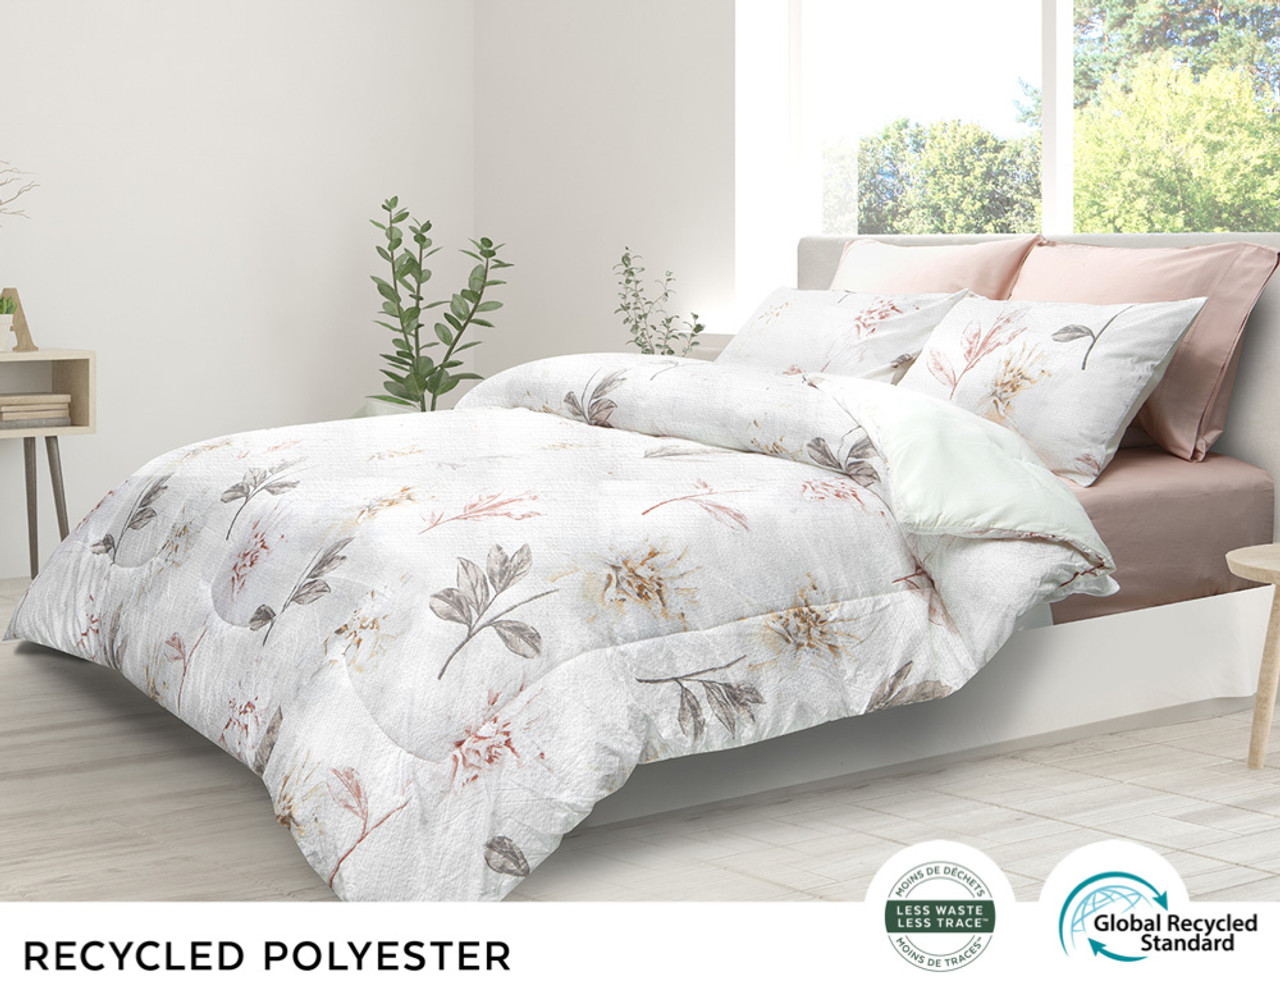 Brielle comforter set, side view. Shown in shades of white with delicate florals